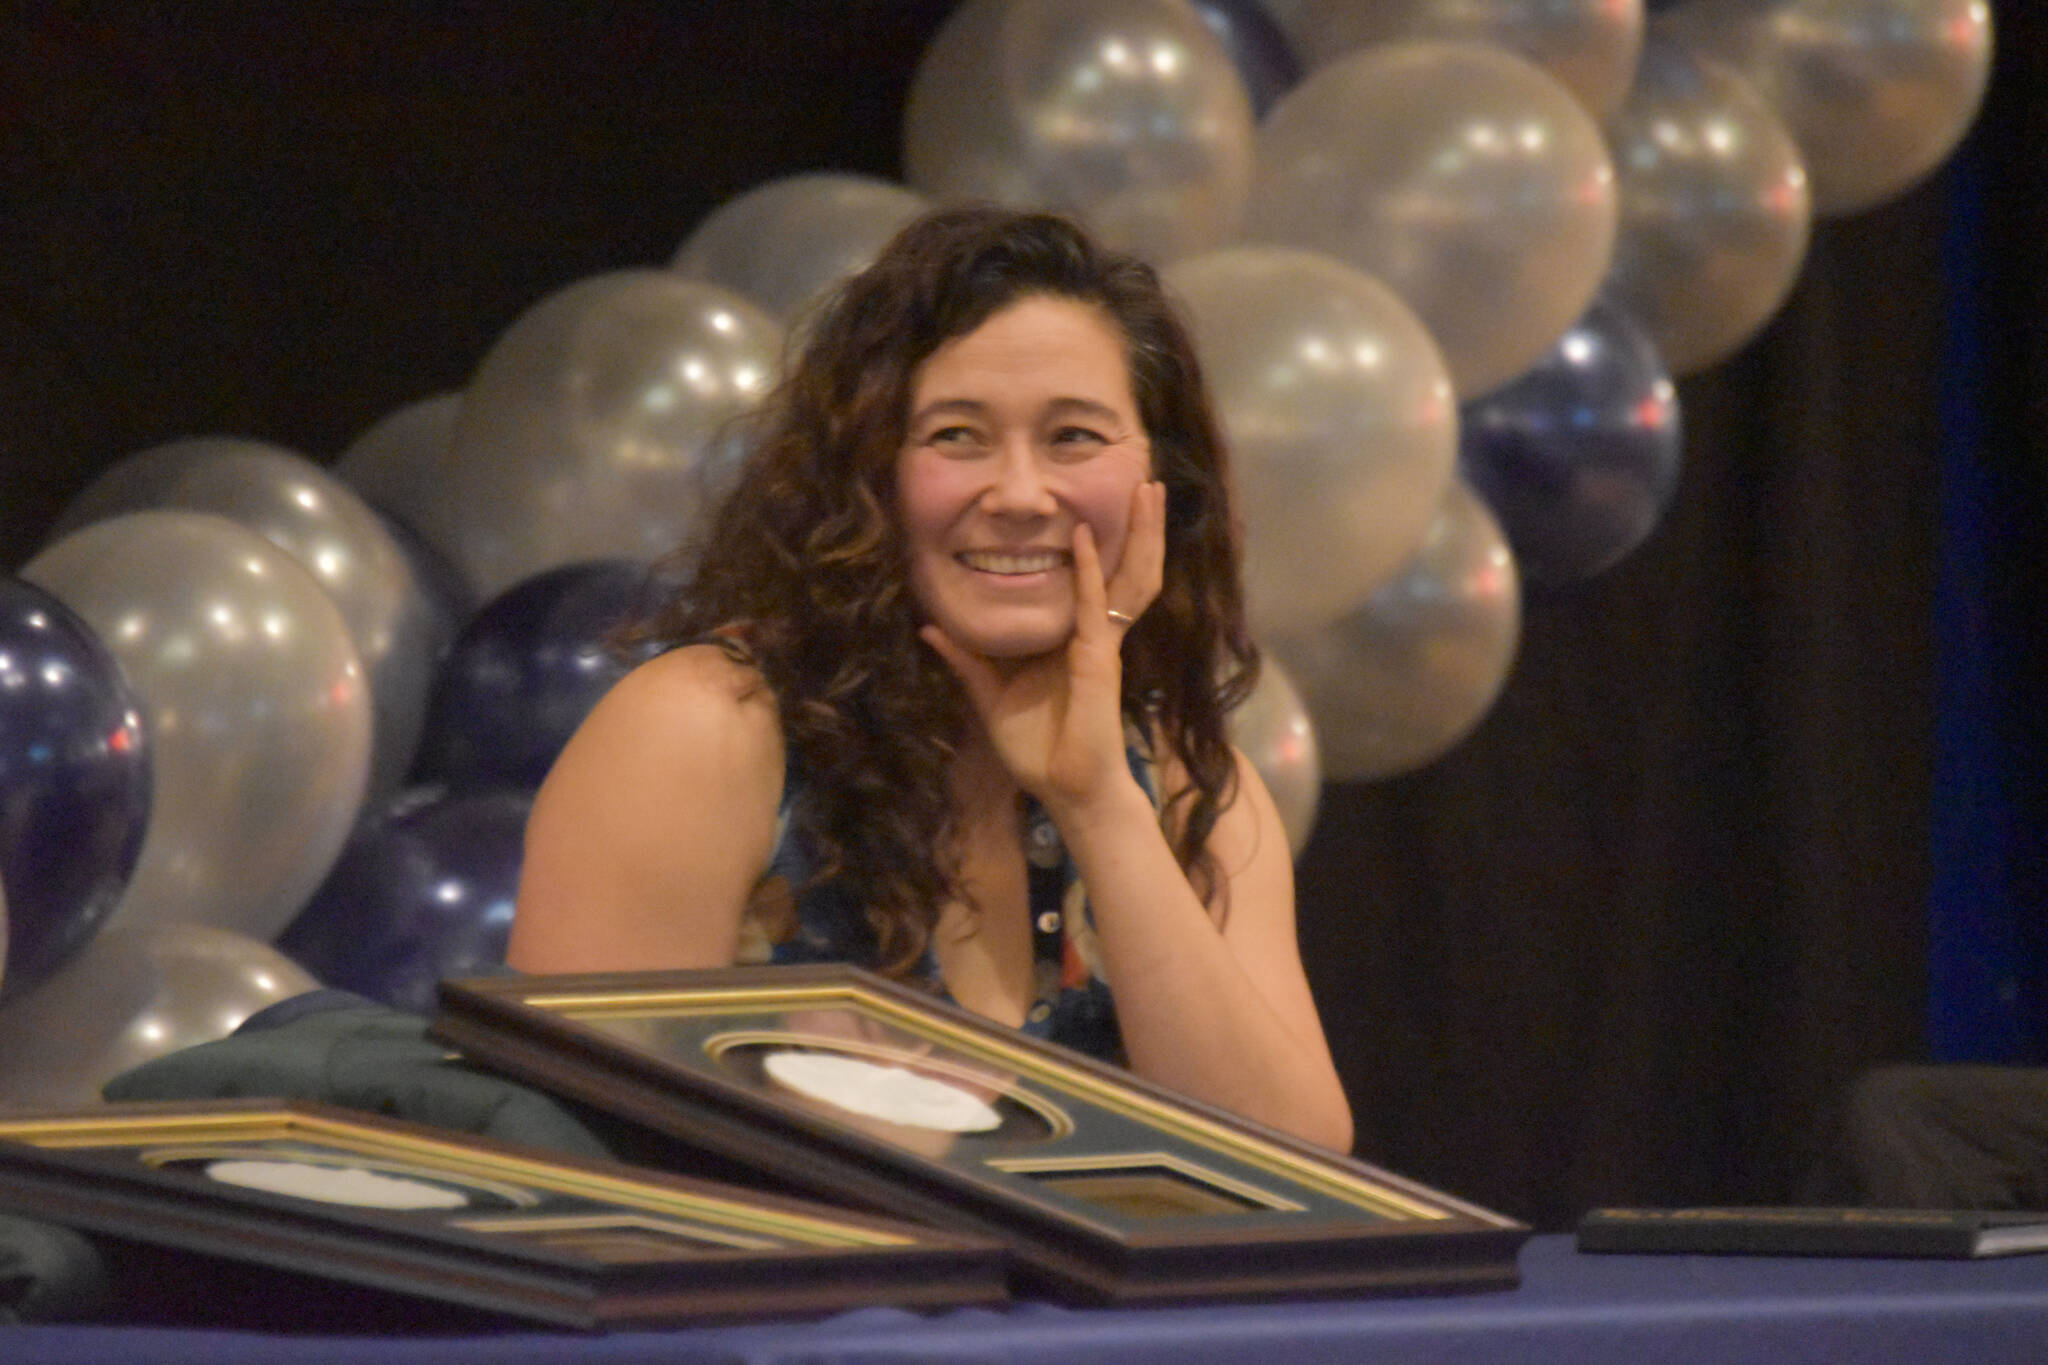 Tela O’Donnell-Bacher laughs at a story being told by Neldon Gardner while both were being inducted to the National Wrestling Hall of Fame following the duel wrestling meet on Tuesday, Nov. 22, 2022, at Soldotna High School in Soldotna, Alaska. (Jake Dye/Peninsula Clarion)